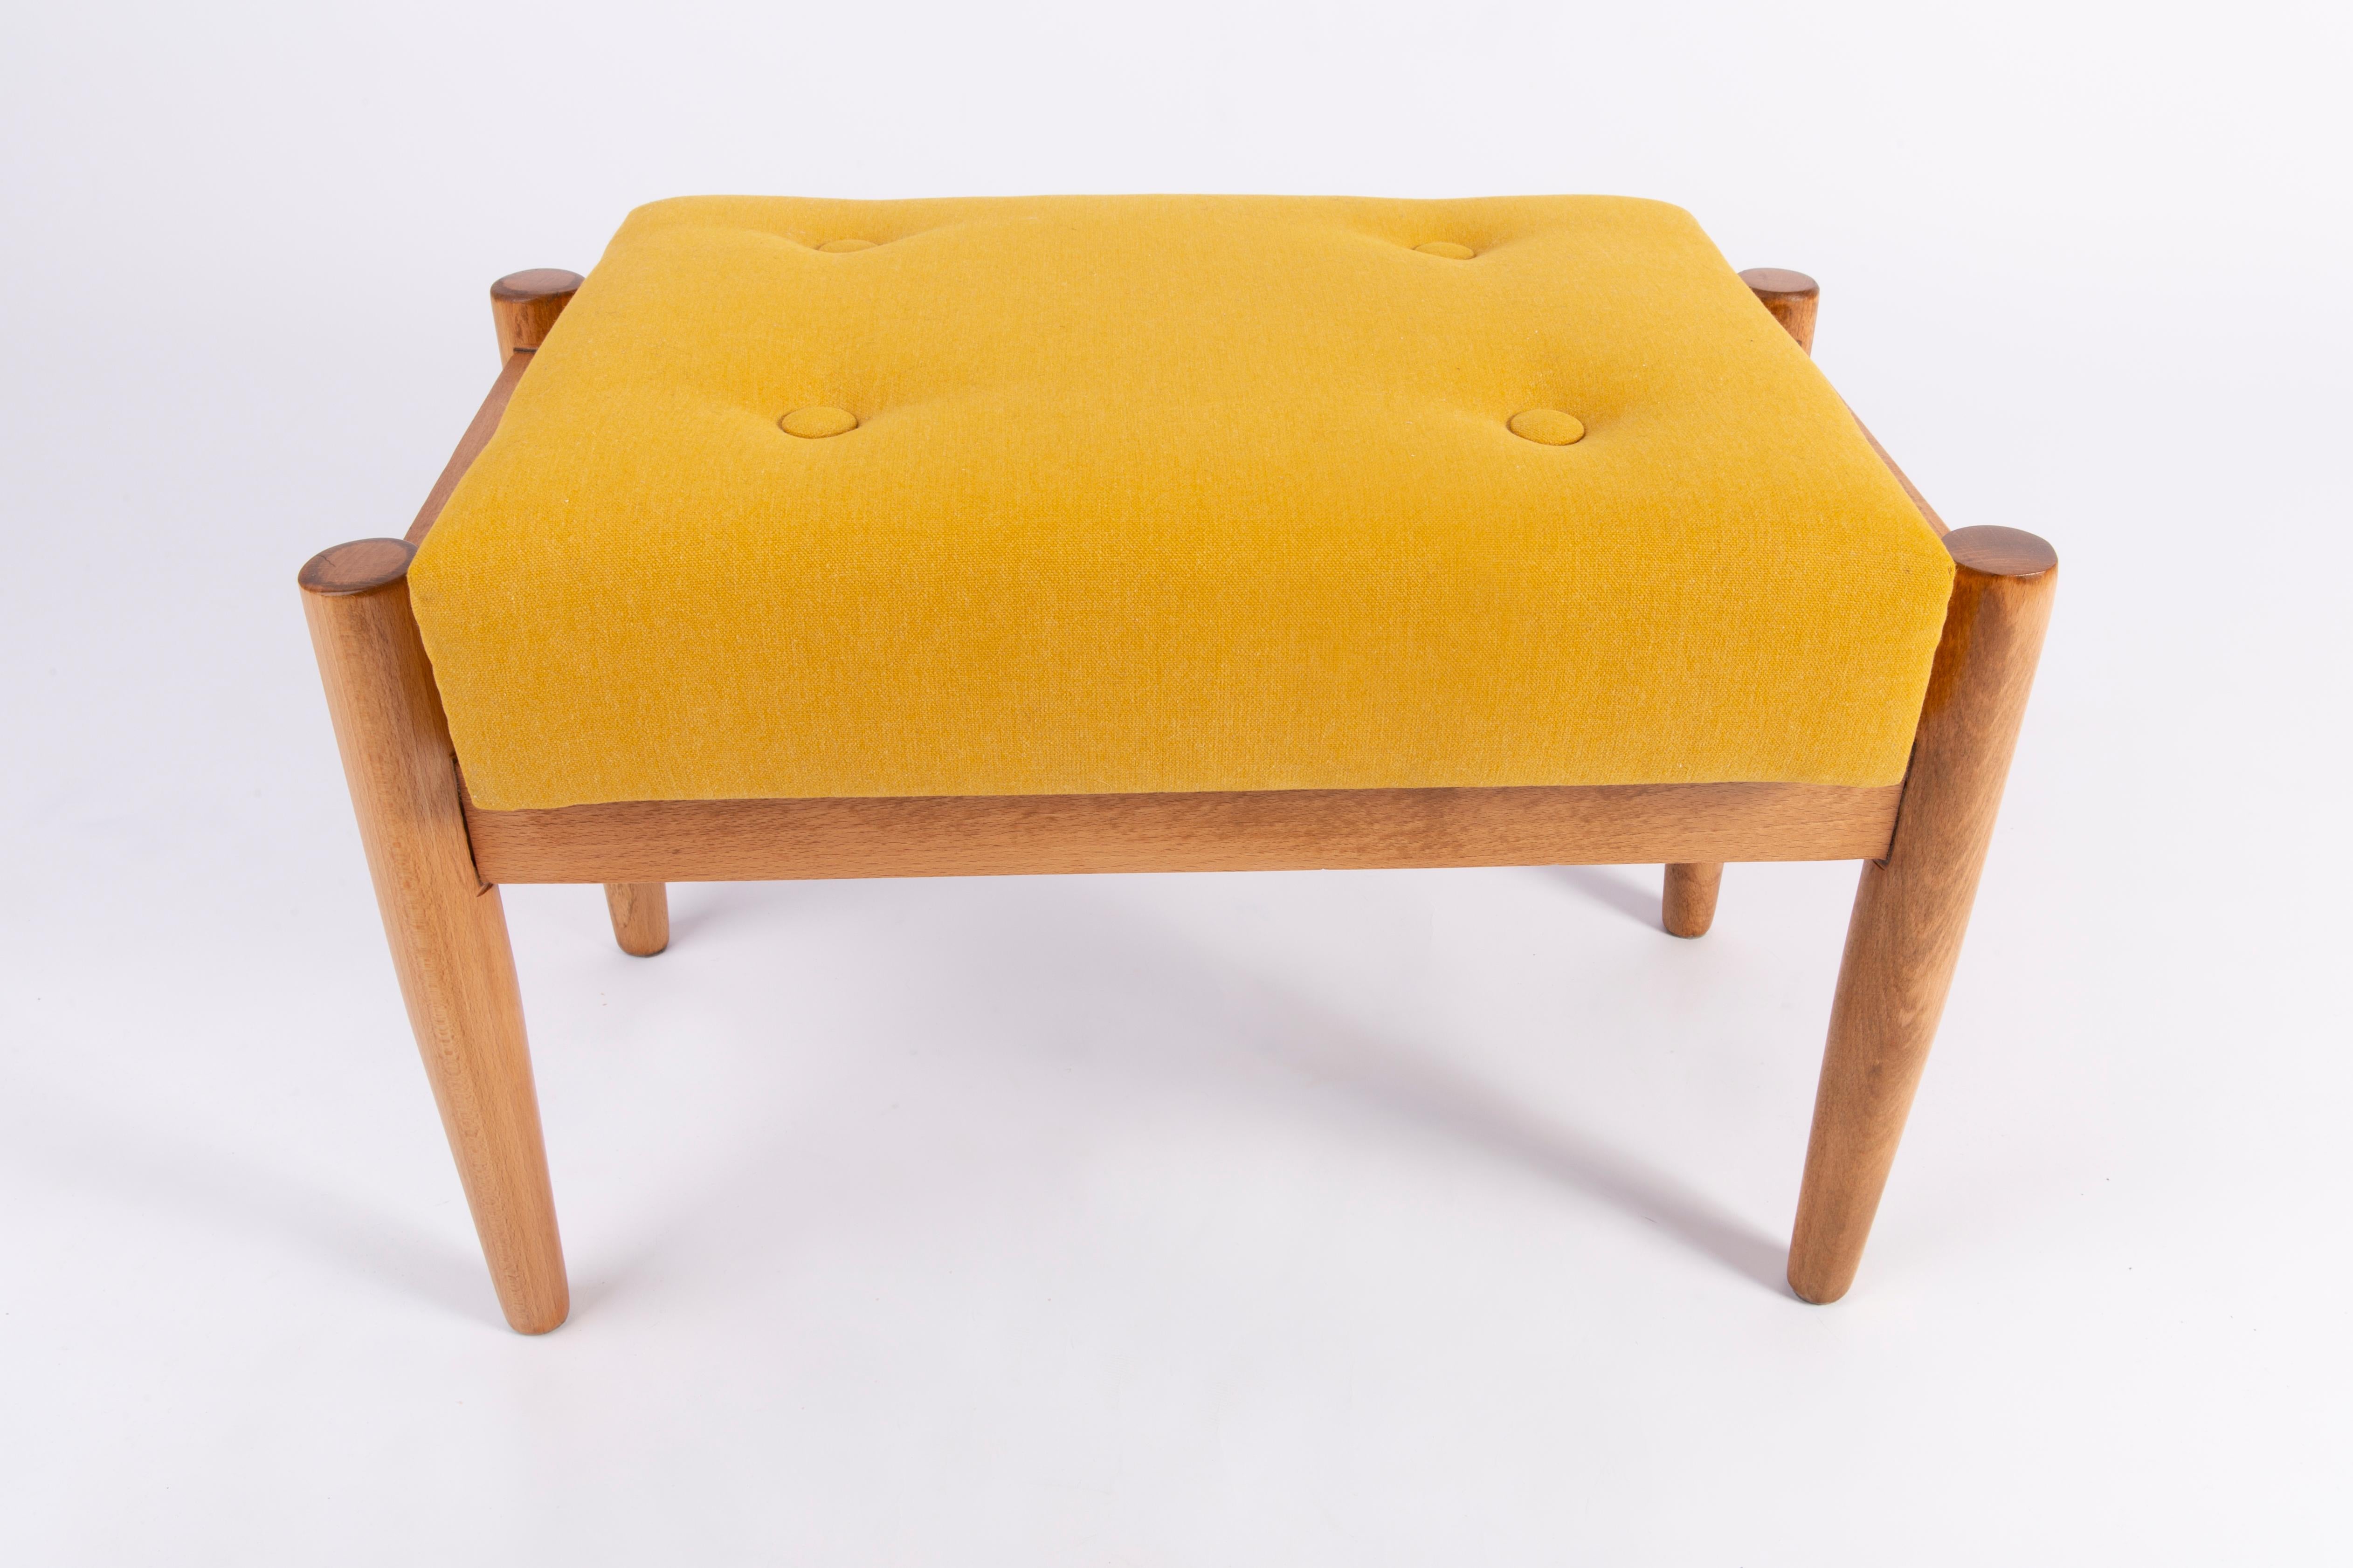 Hand-Crafted Midcentury Mustard Yellow Vintage Stool, Edmund Homa, 1960s For Sale